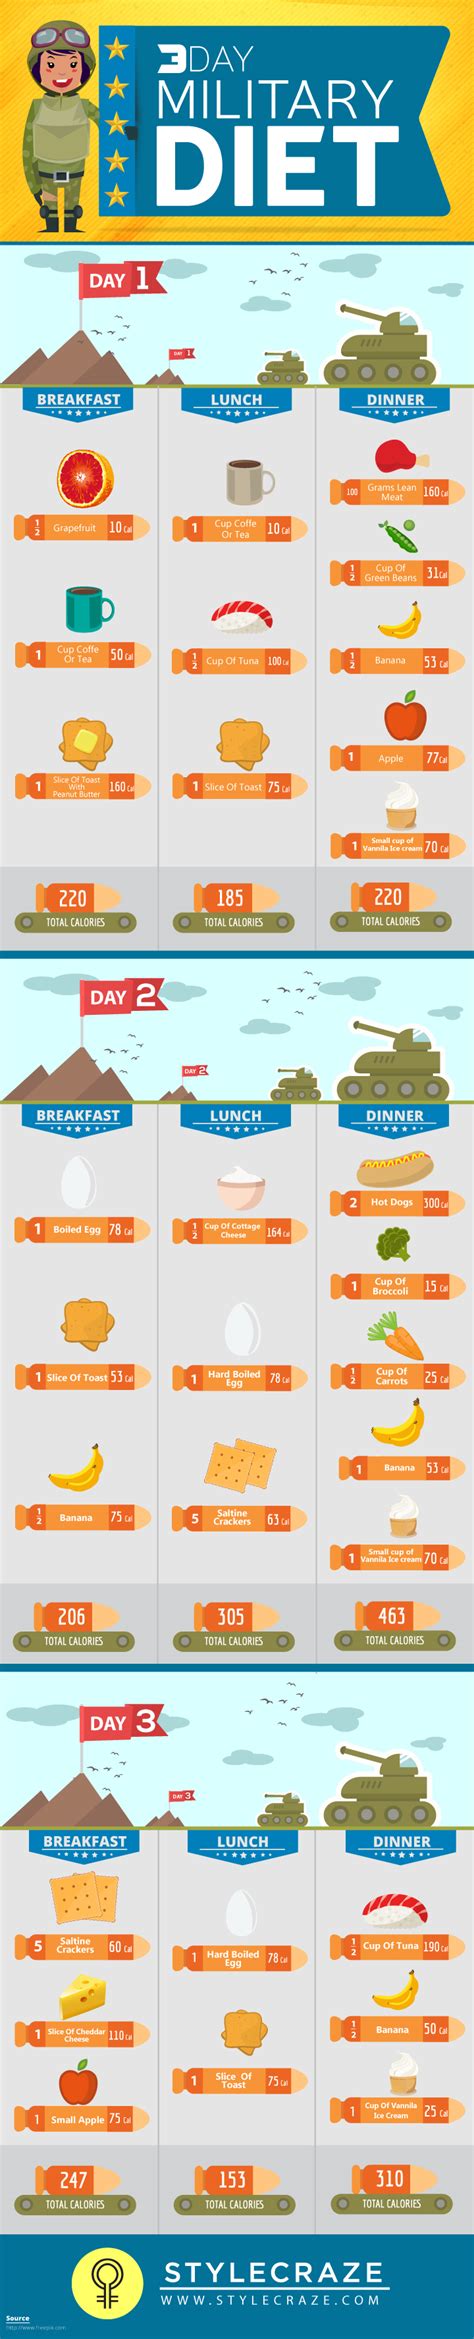 Military Diet For Rapid Weight Loss | Military diet, Lost ...